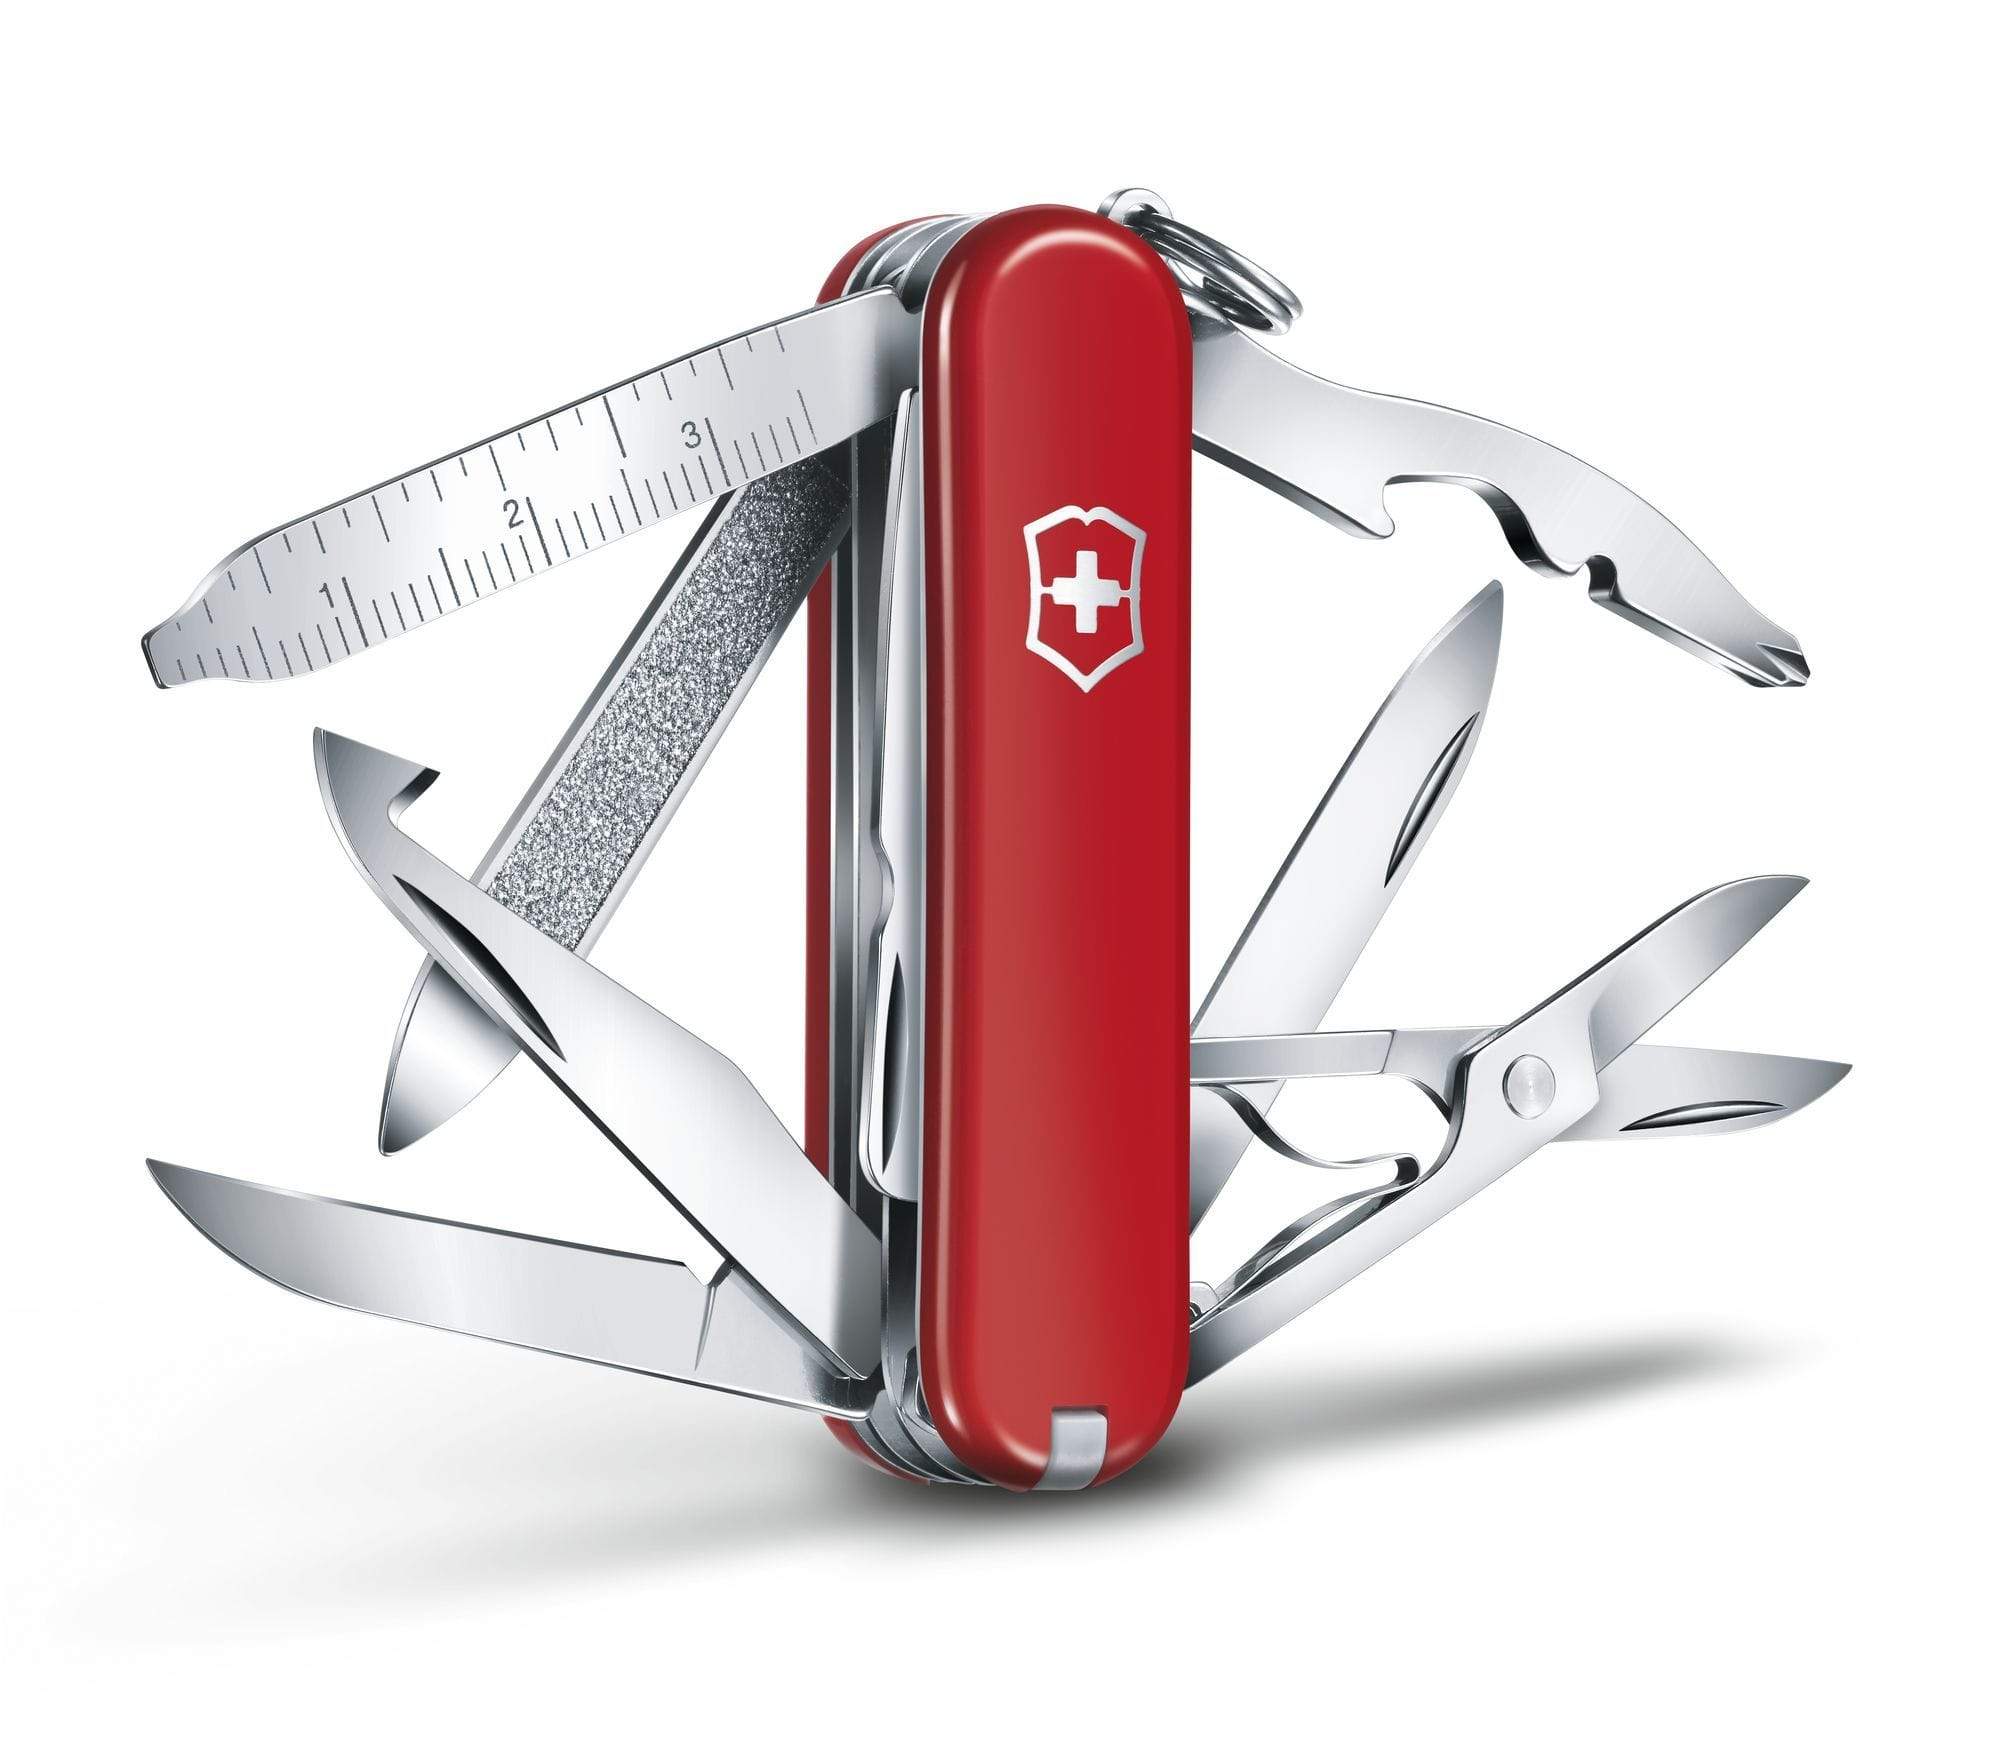 Victorinox Swiss Army Knife Knife Minichamp 58mm Red With 18 Functions - 0.6385